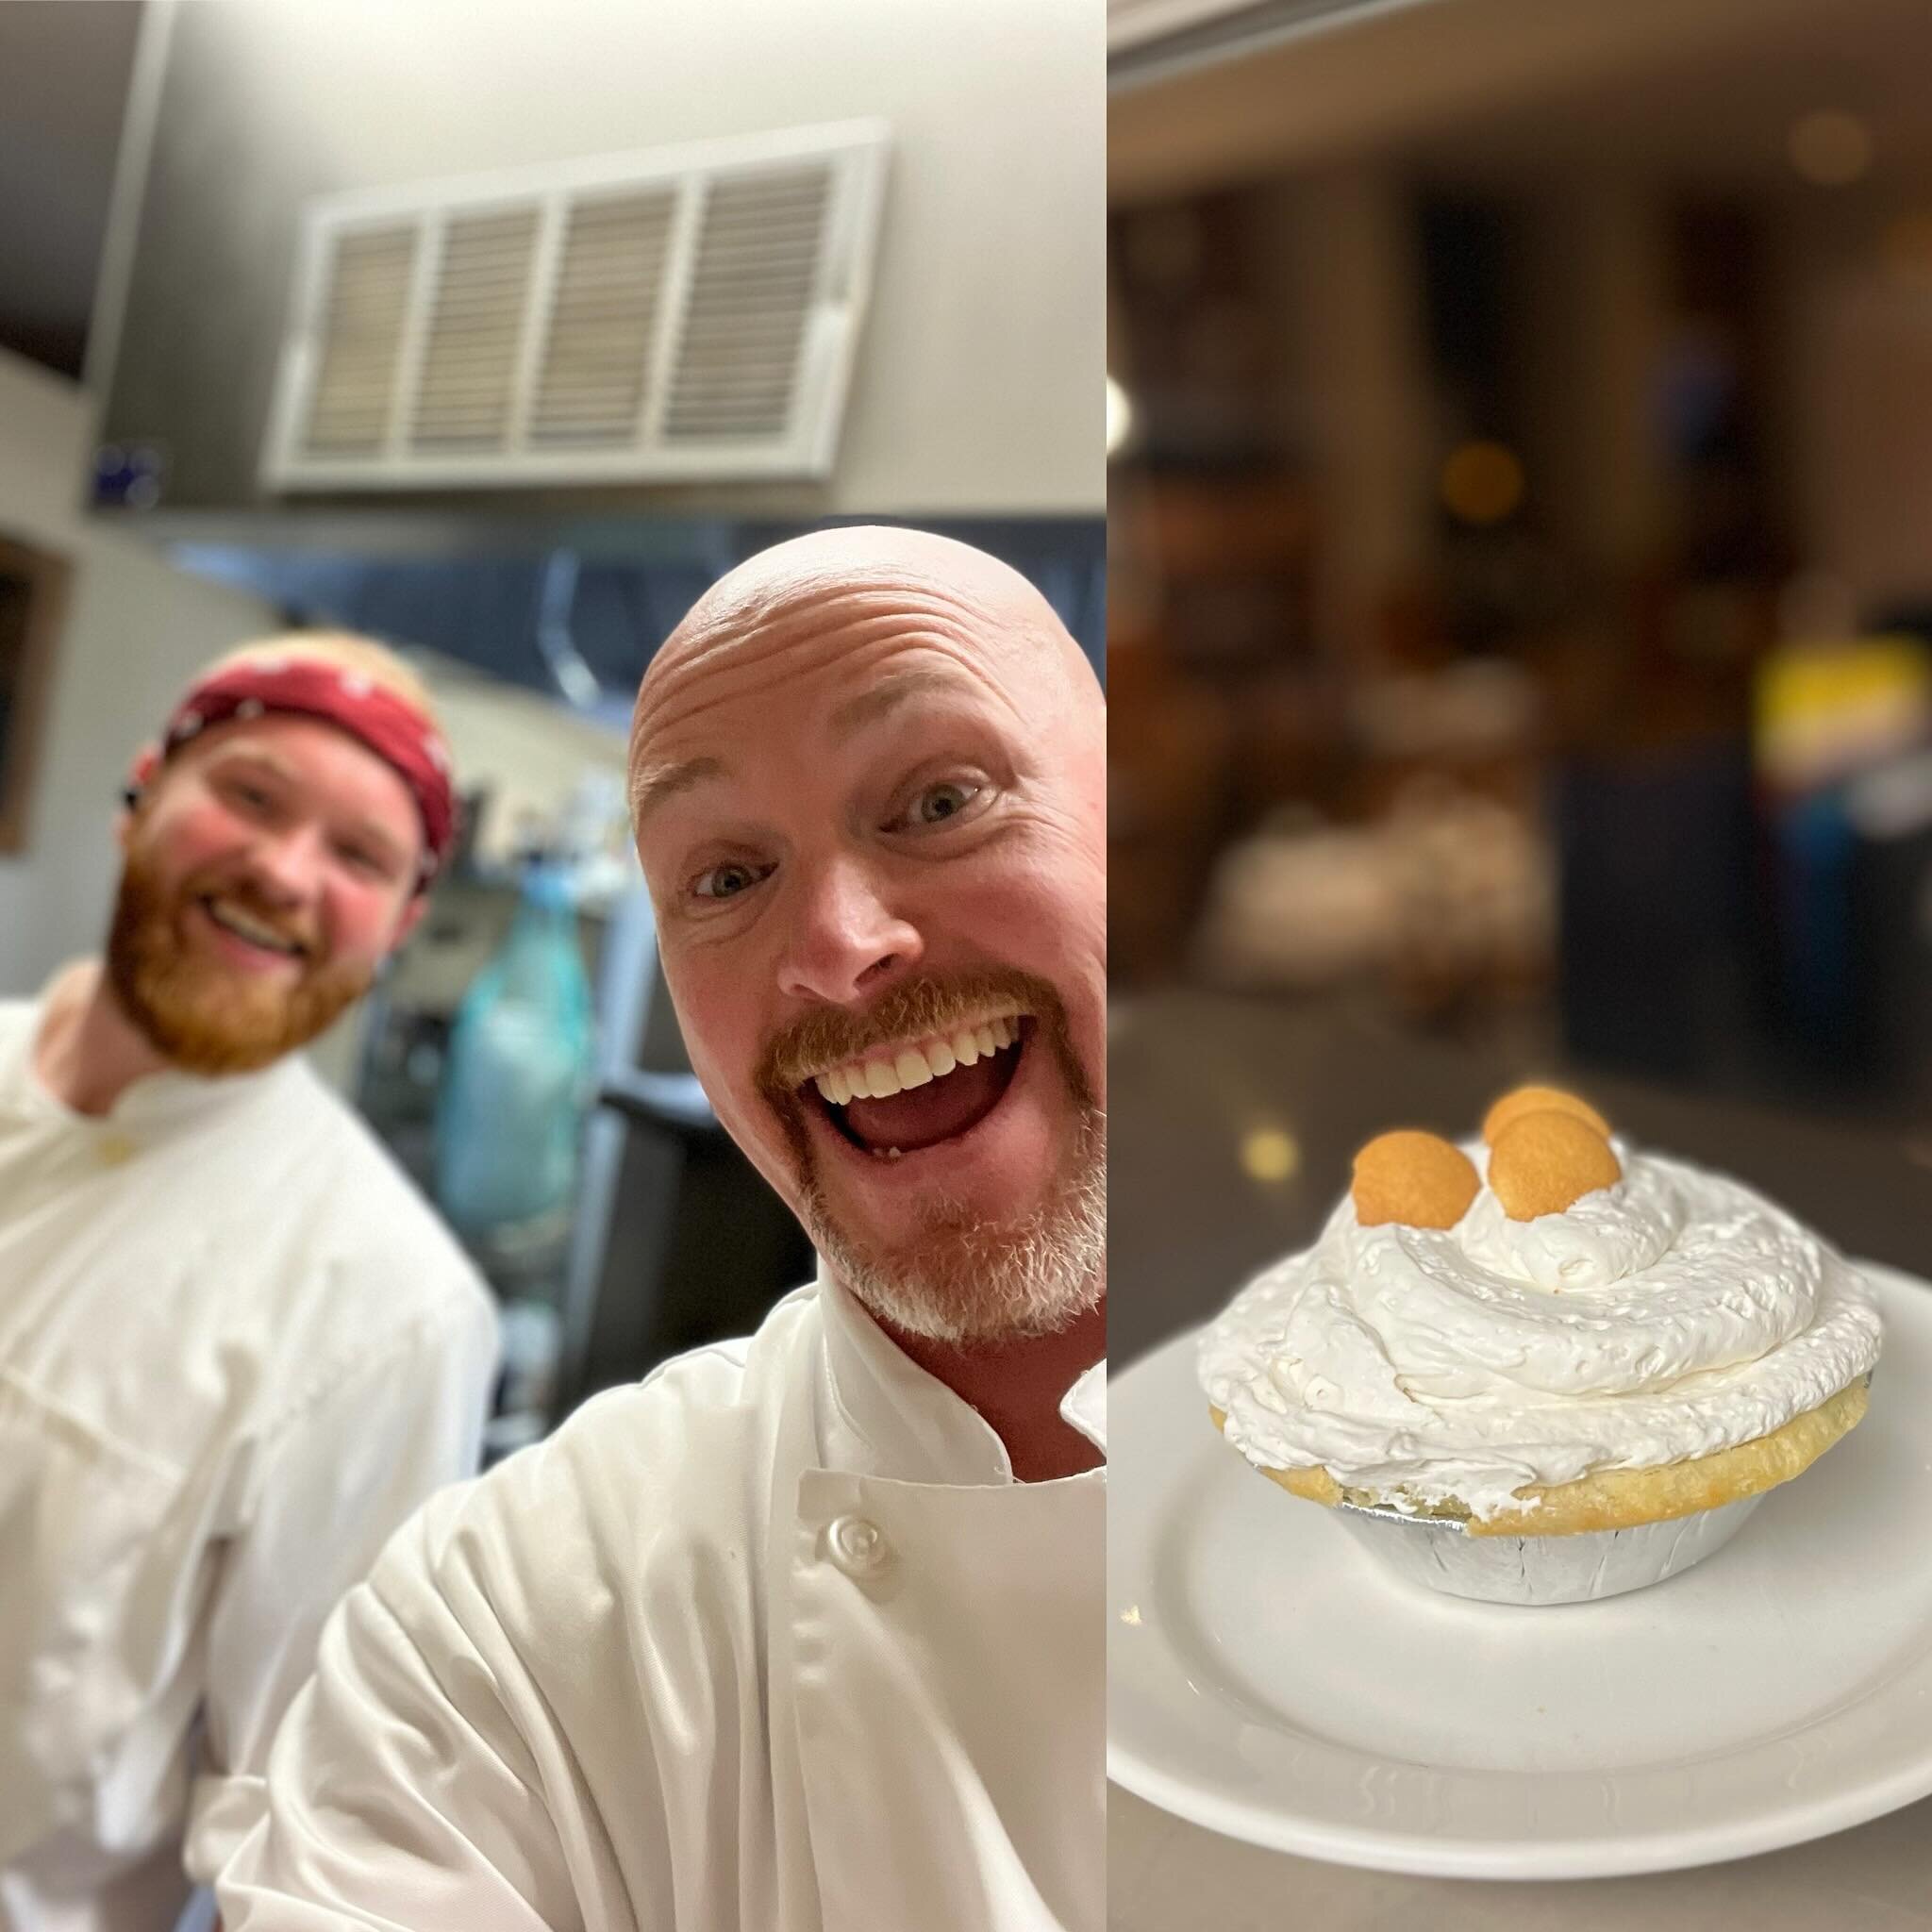 Let me give this picture a little context. While trying to photograph the banana cream pie we&rsquo;re showcasing this month, I accidentally flipped the camera around, inadvertently revealing my age a bit 😂 Patrick and I promptly embraced the mistak